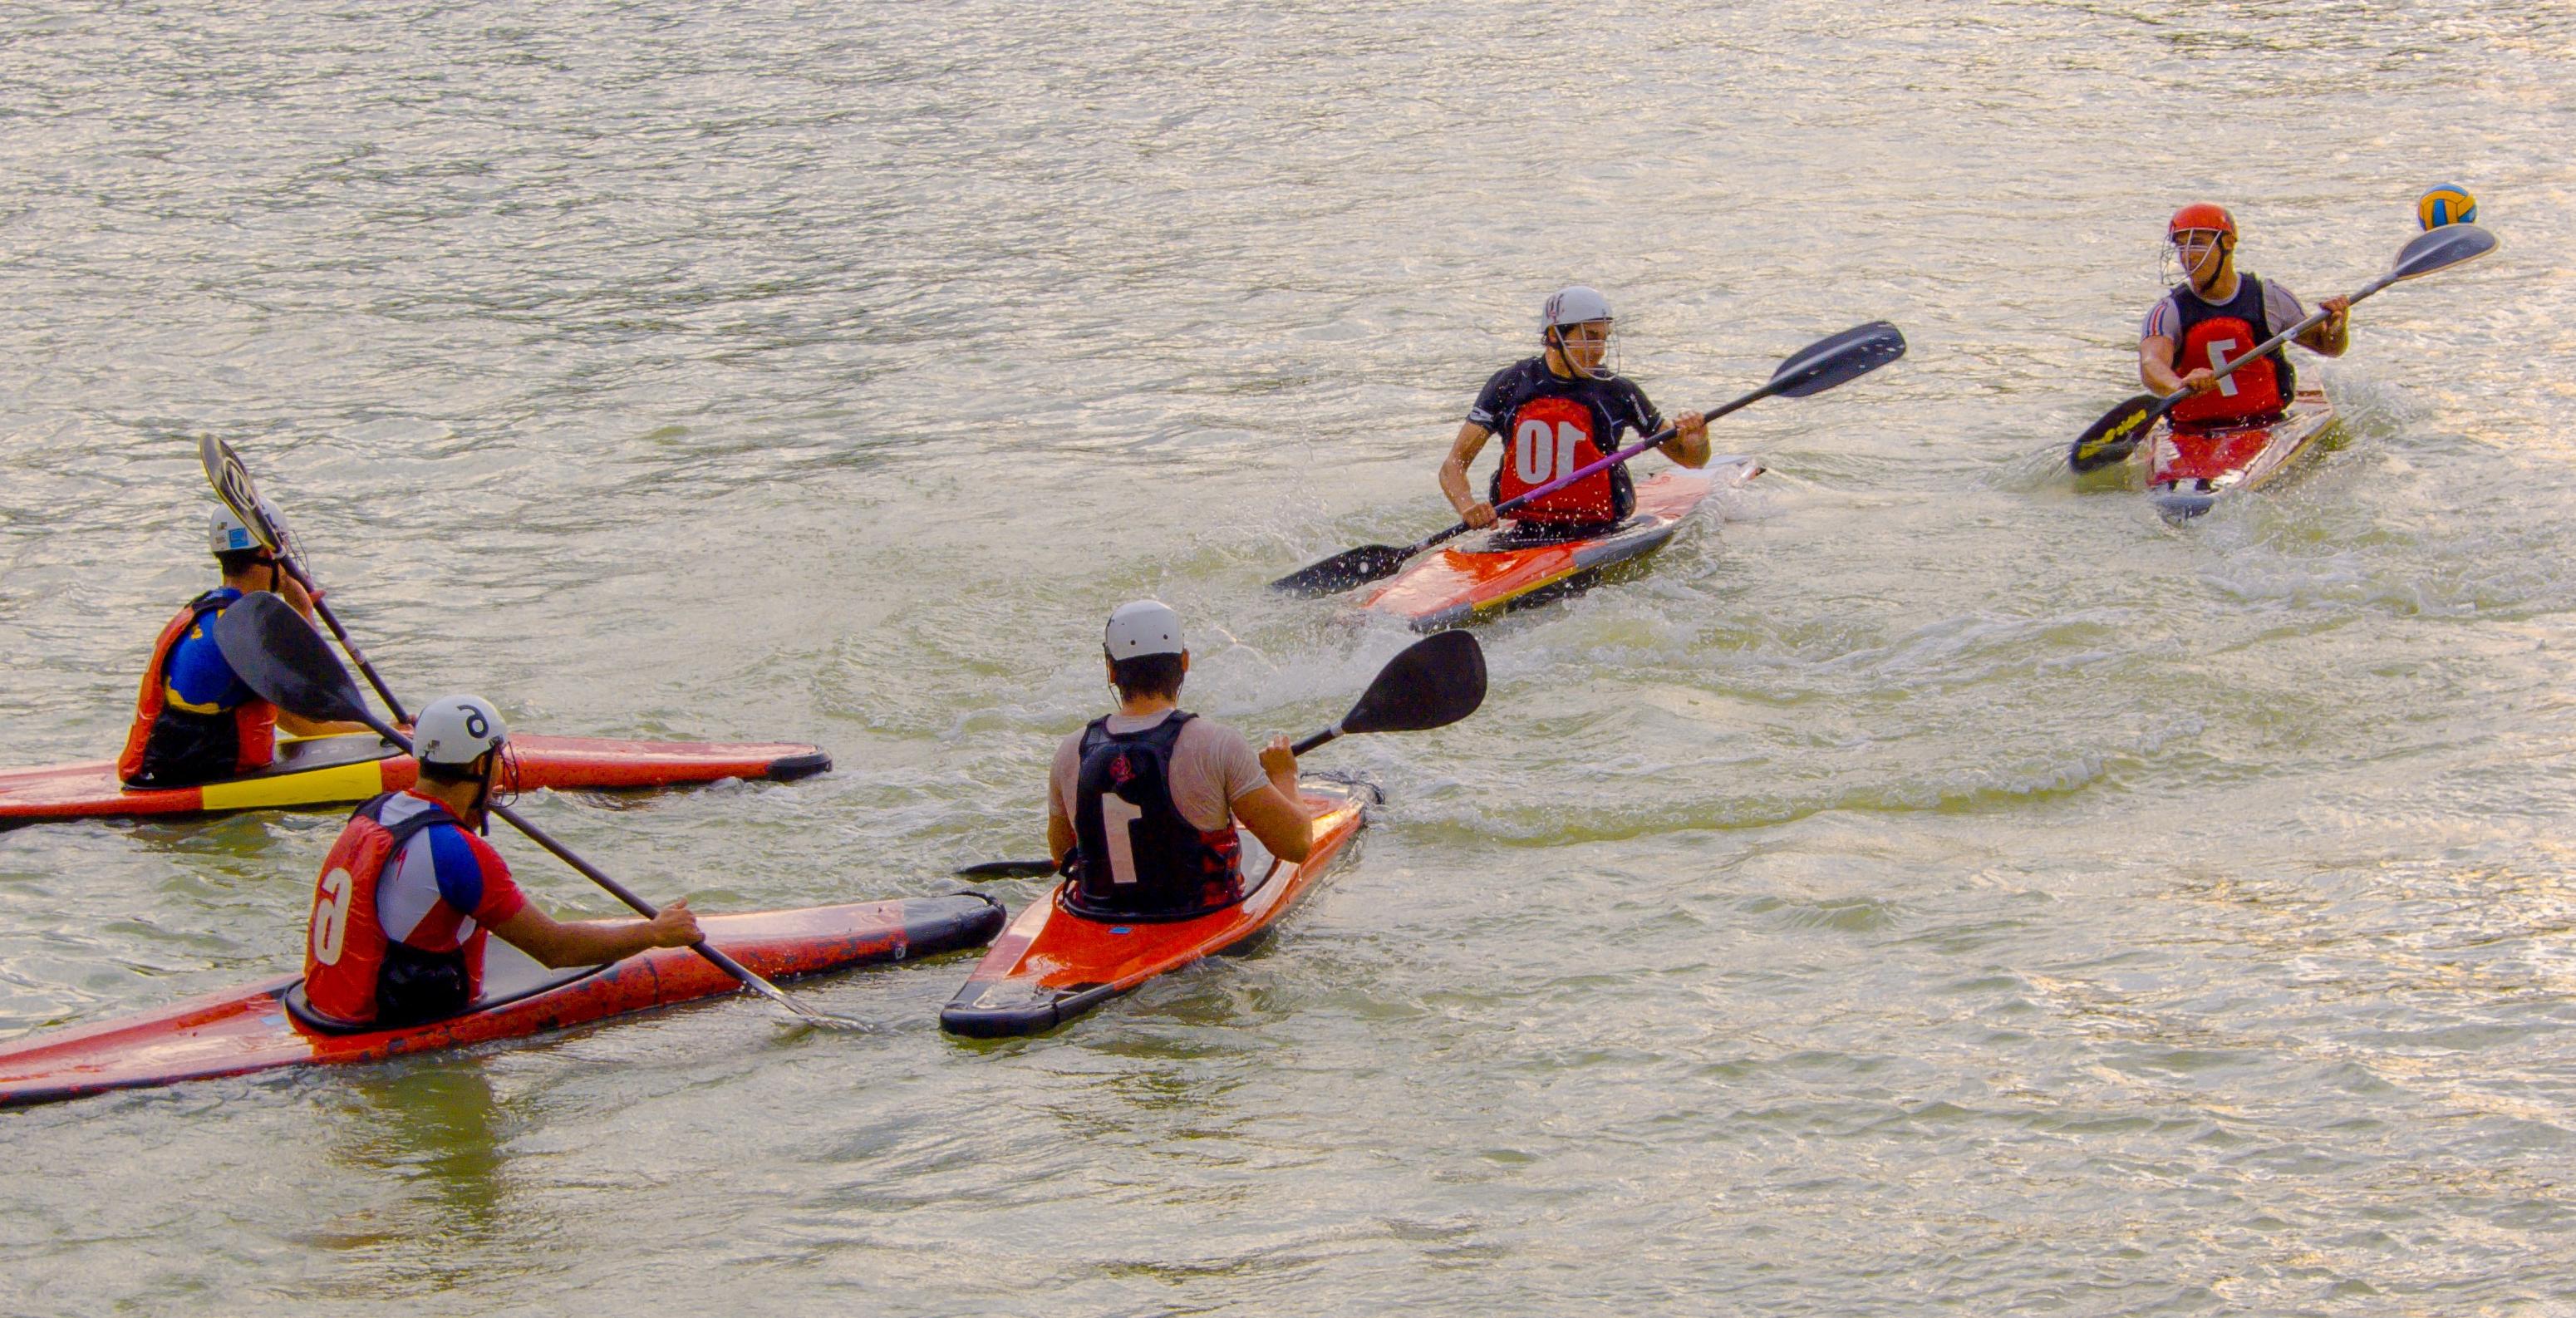 Free picture: oar, canoe, competition, teamwork, kayak 